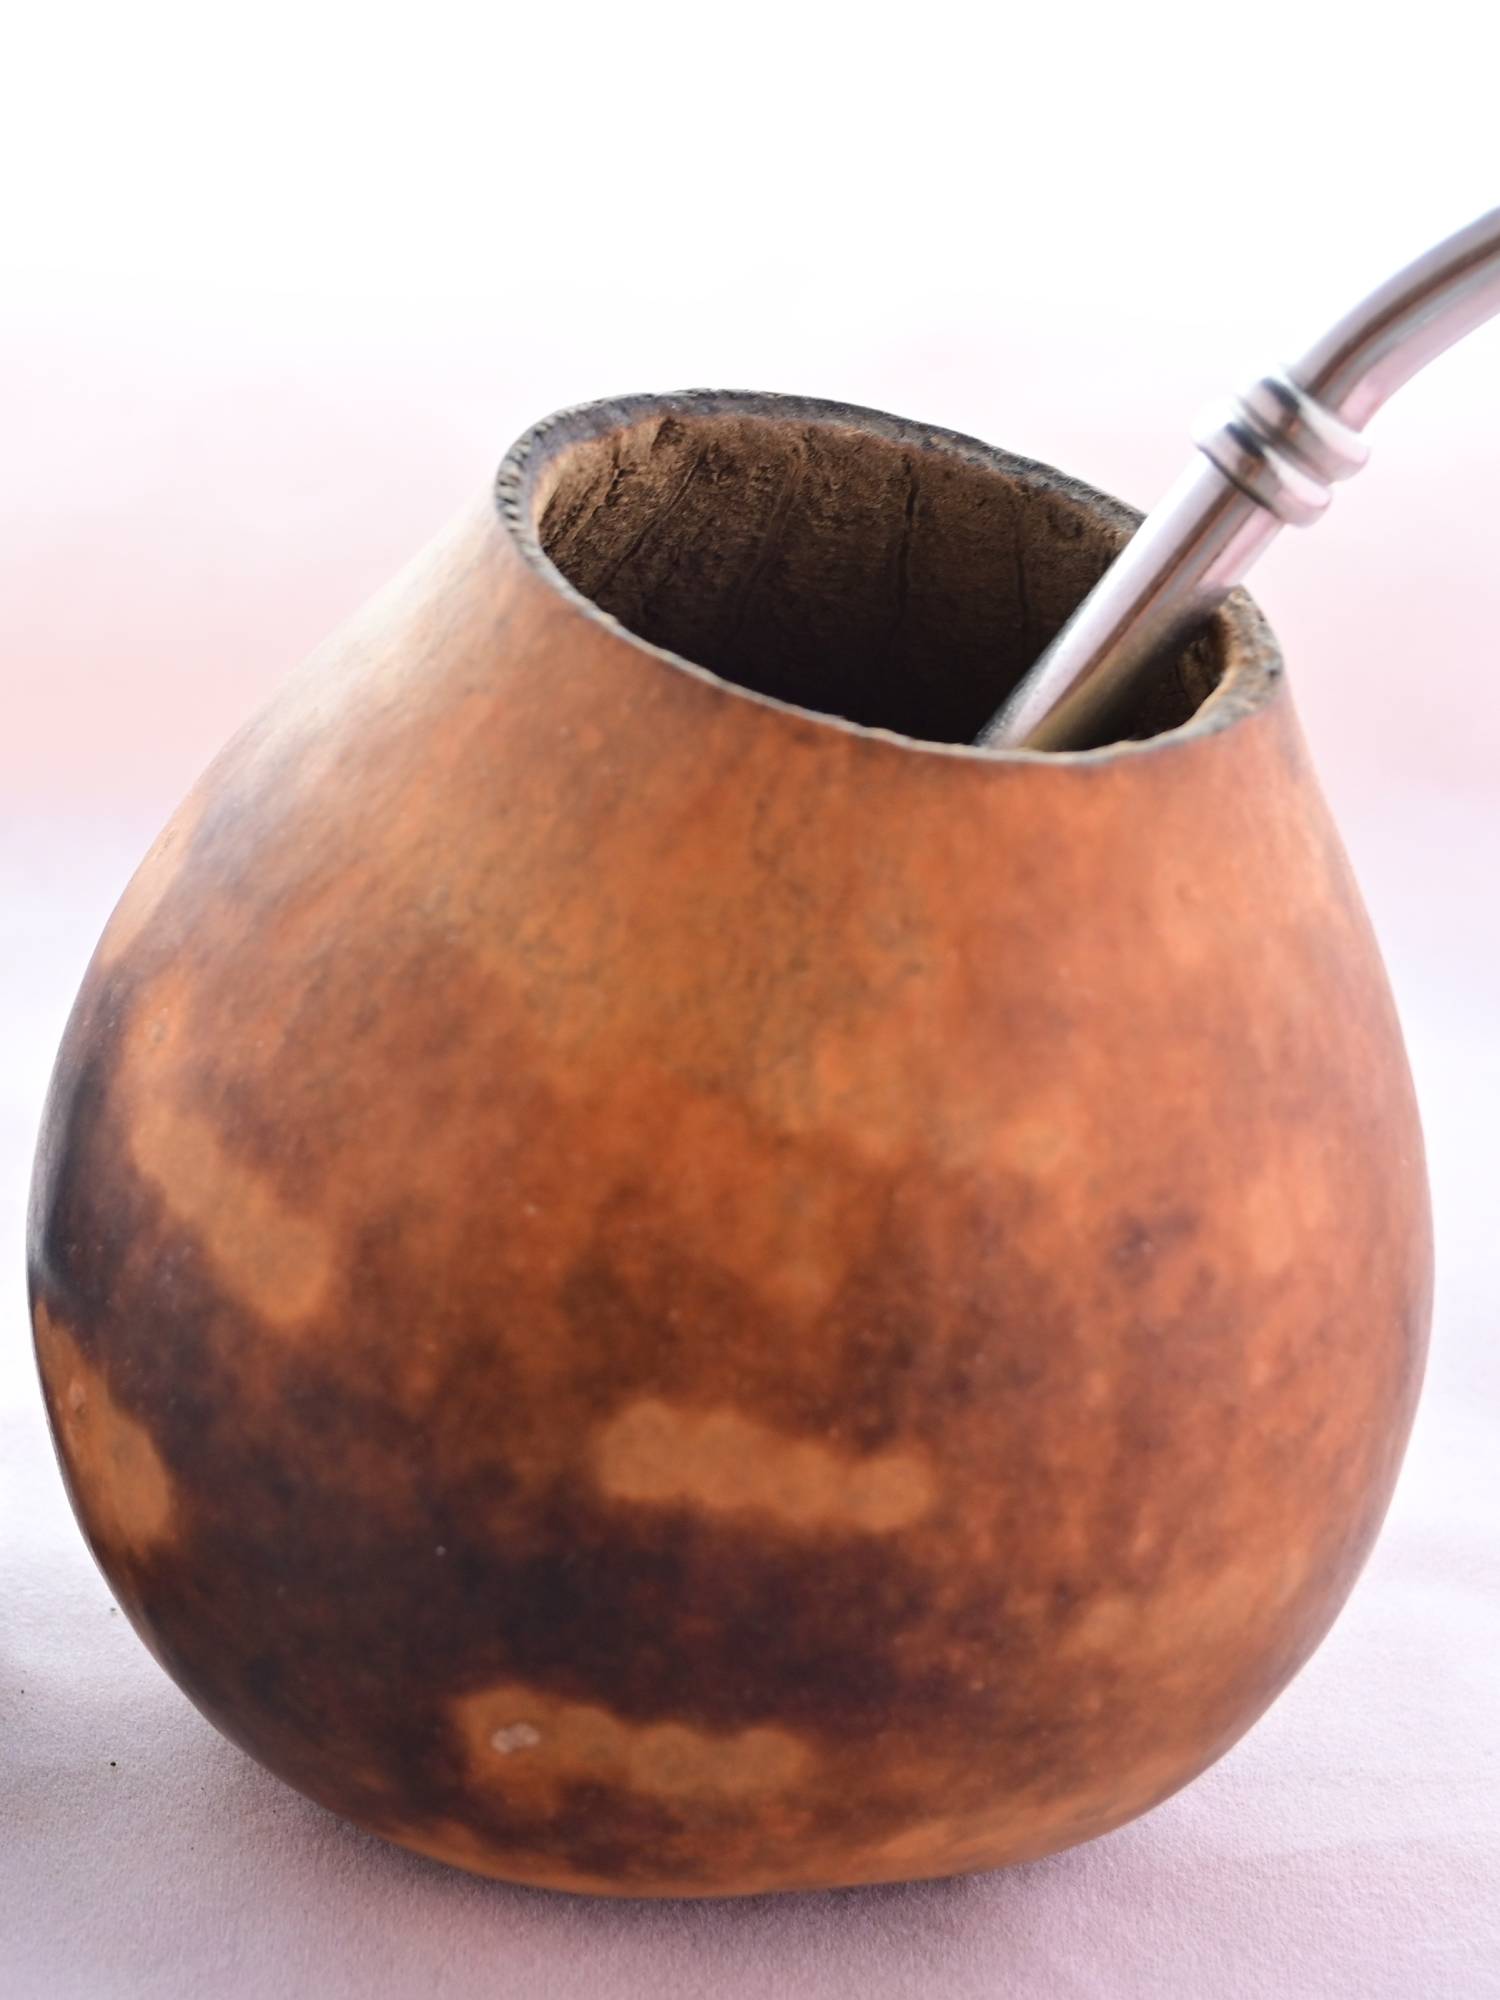 The traditional drinking set up for Guayusa, featuring a brown gourd with a circle cut out at the top. A metal straw comes from inside the gourd and hangs to the right.